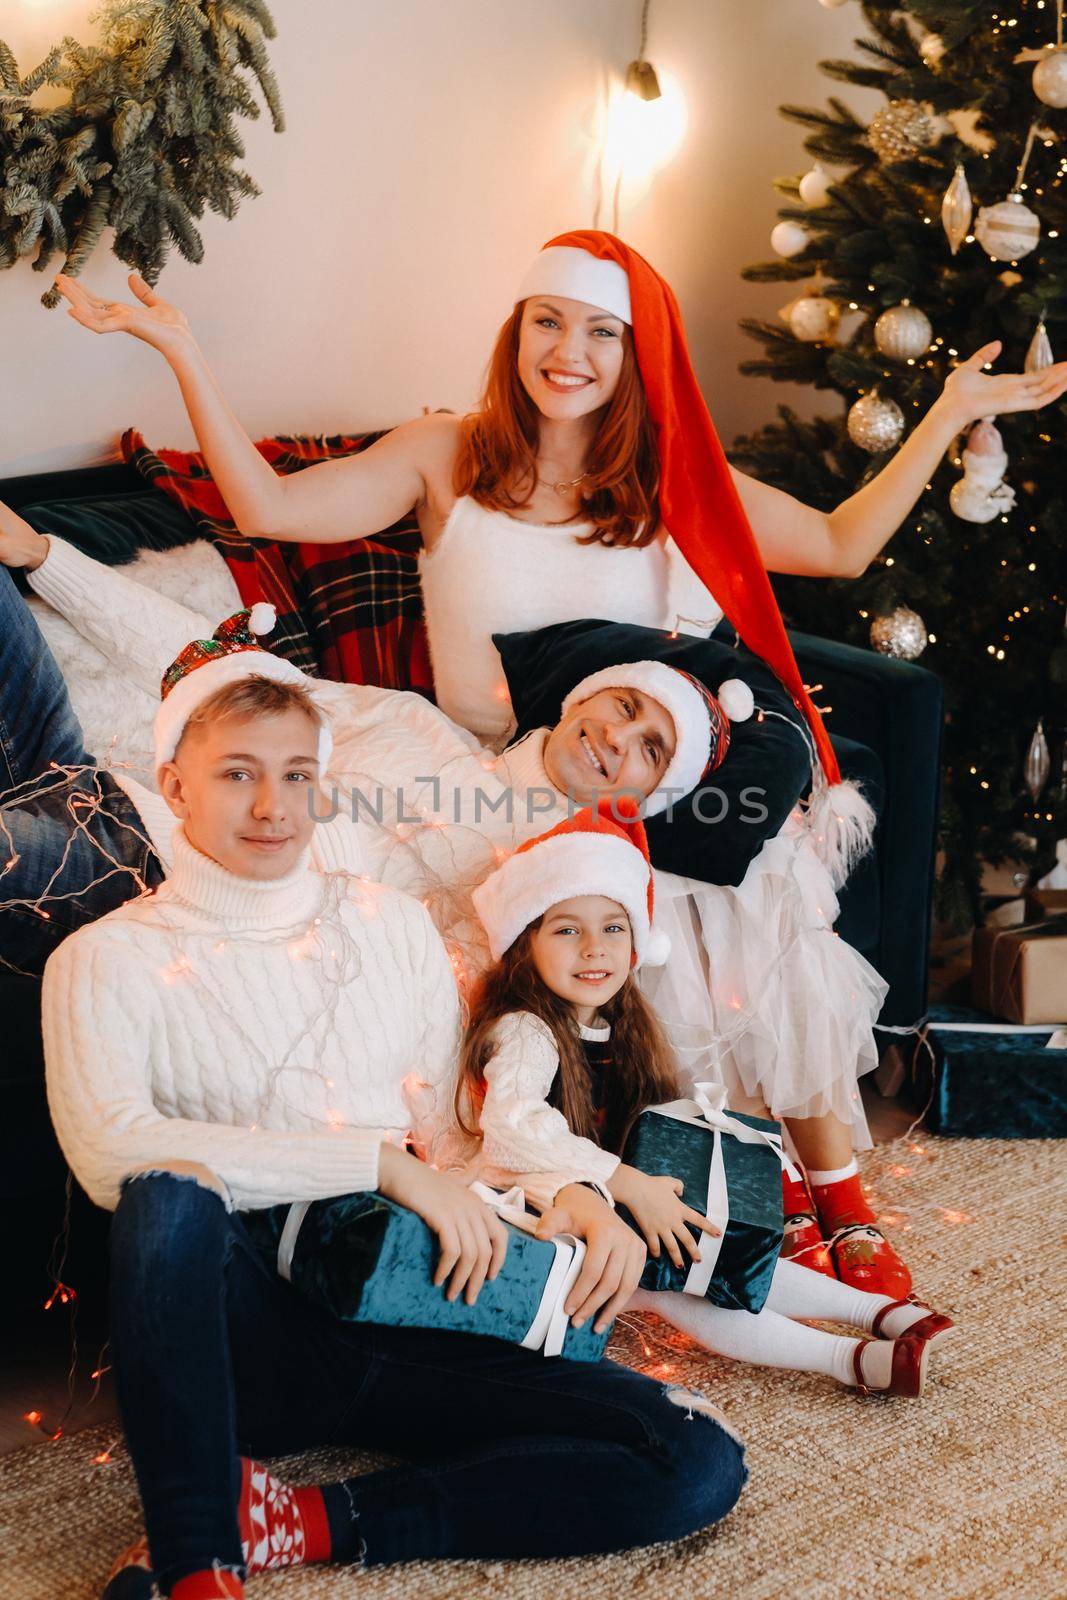 Close-up portrait of a happy family sitting on a sofa near a Christmas tree celebrating a holiday.